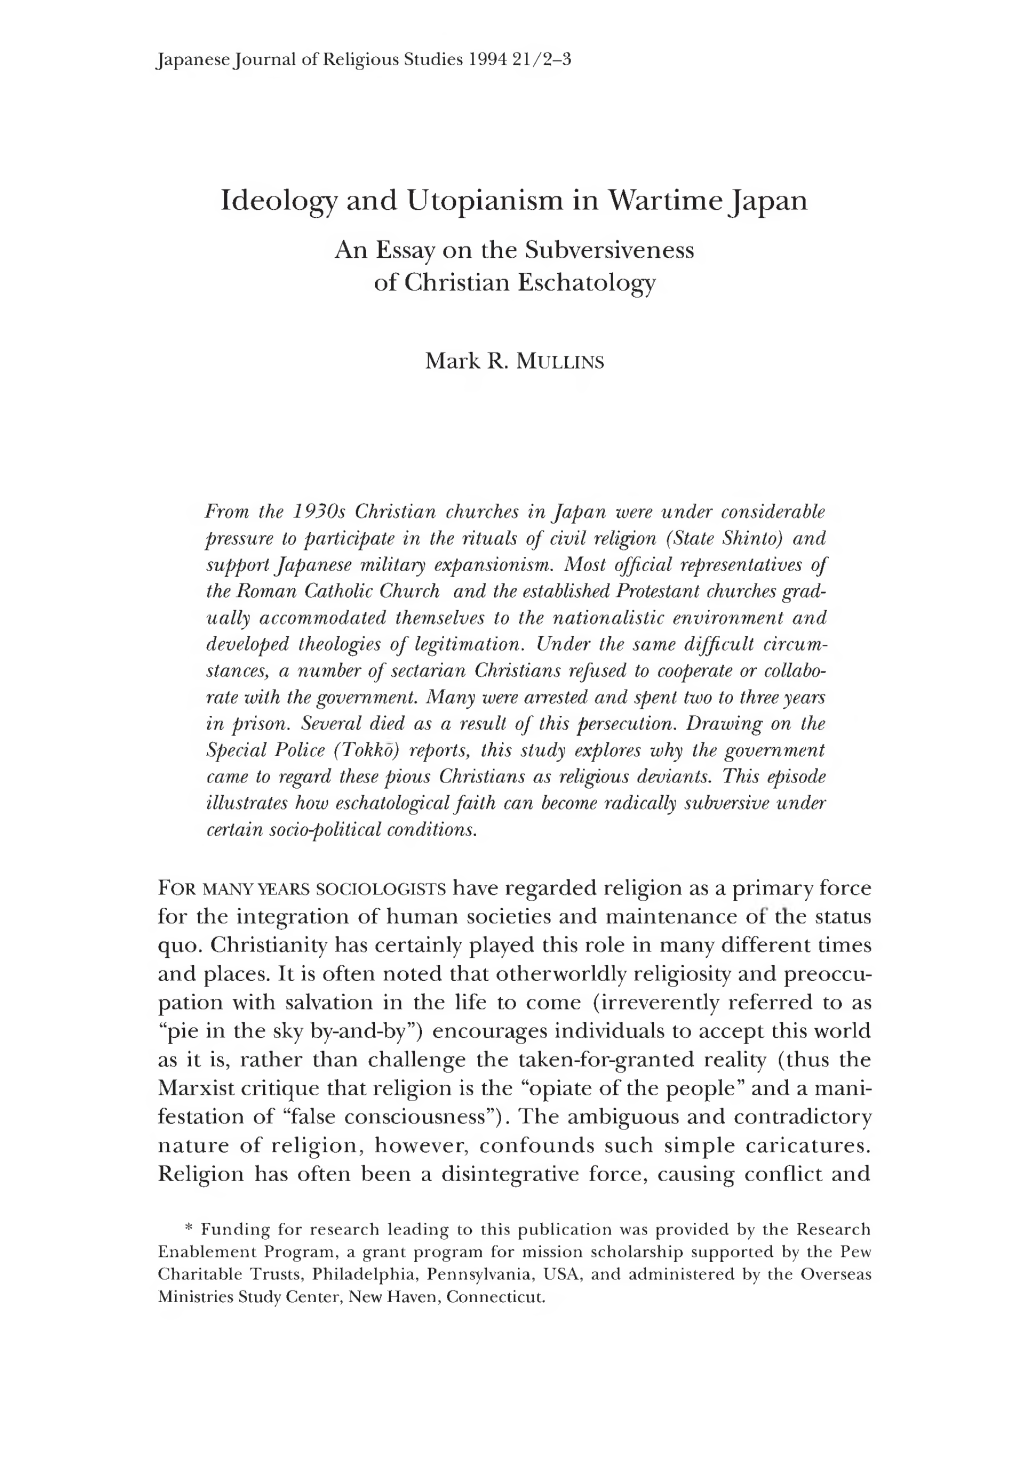 Ideology and Utopianism in Wartime Japan an Essay on the Subversiveness of Christian Eschatology